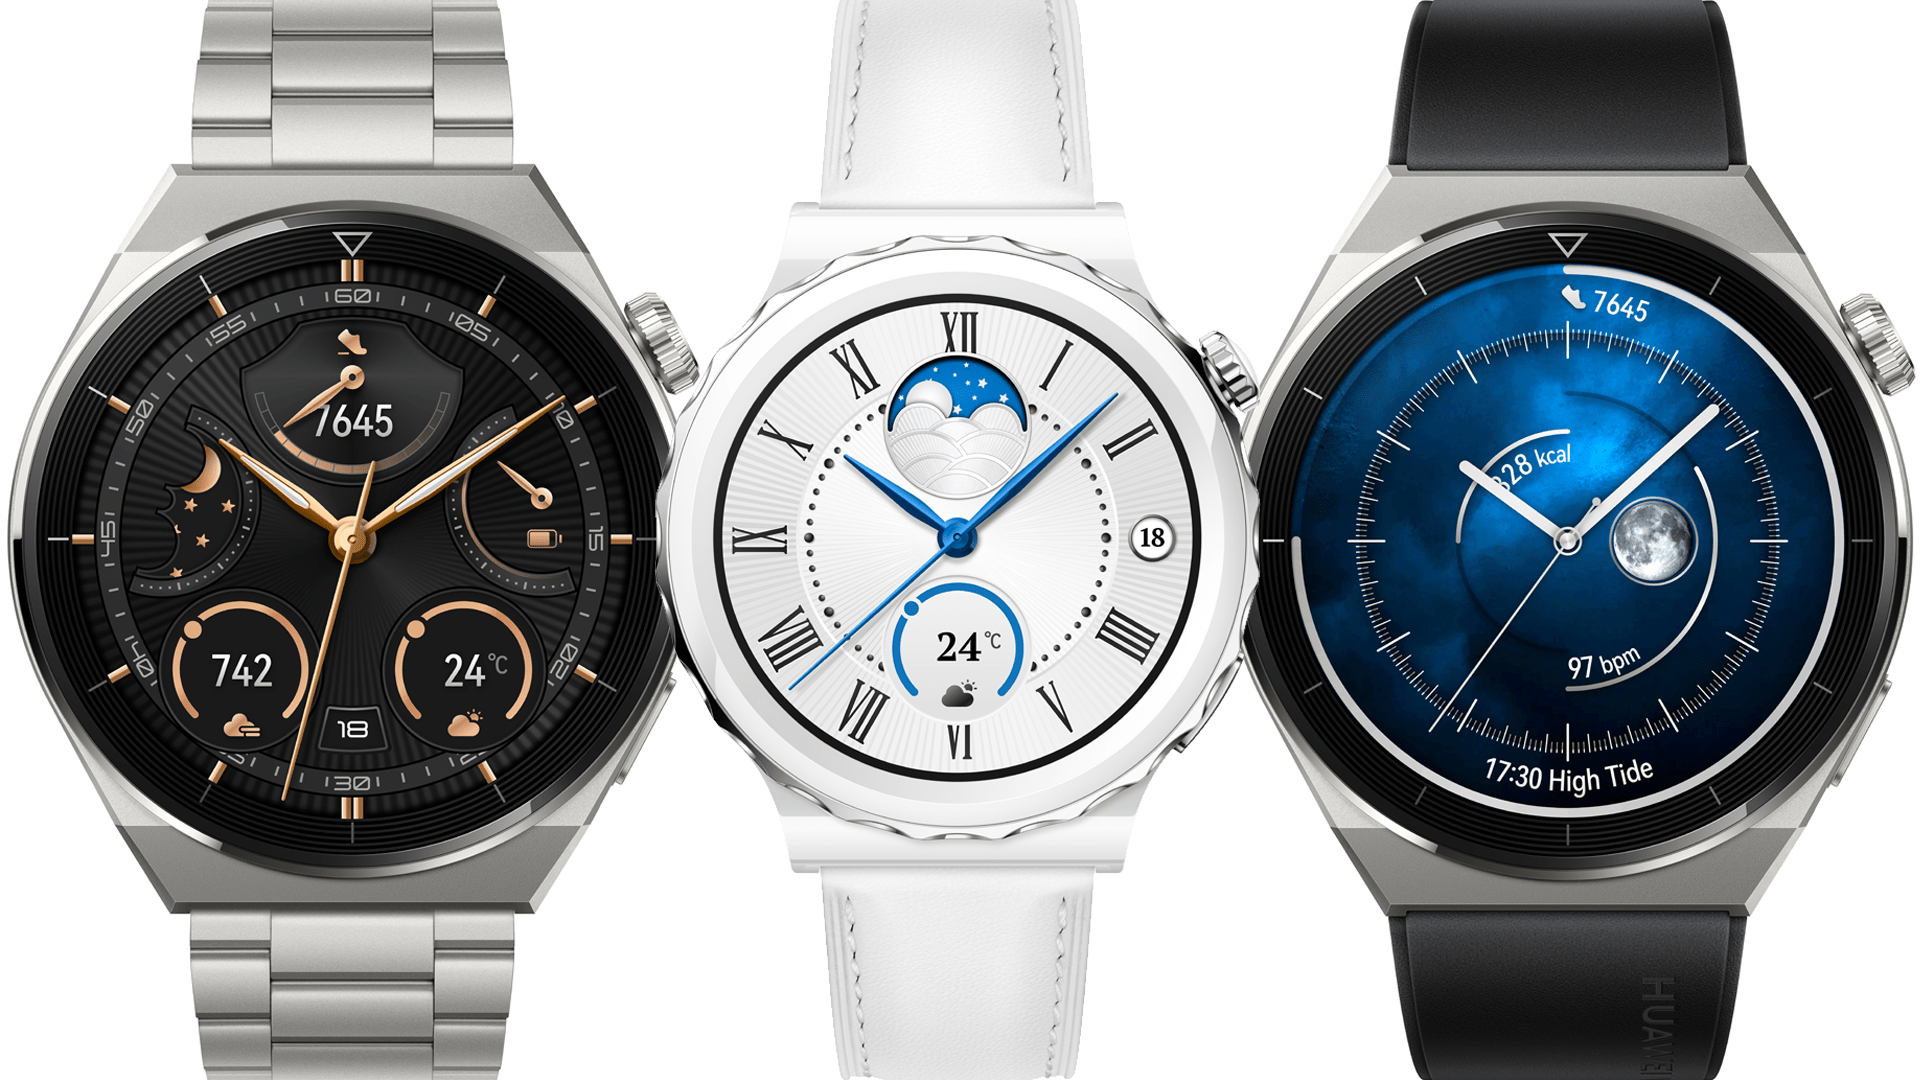 Huawei-Watch-GT3-Pro-prices-variants-of-the-smartwatches.png